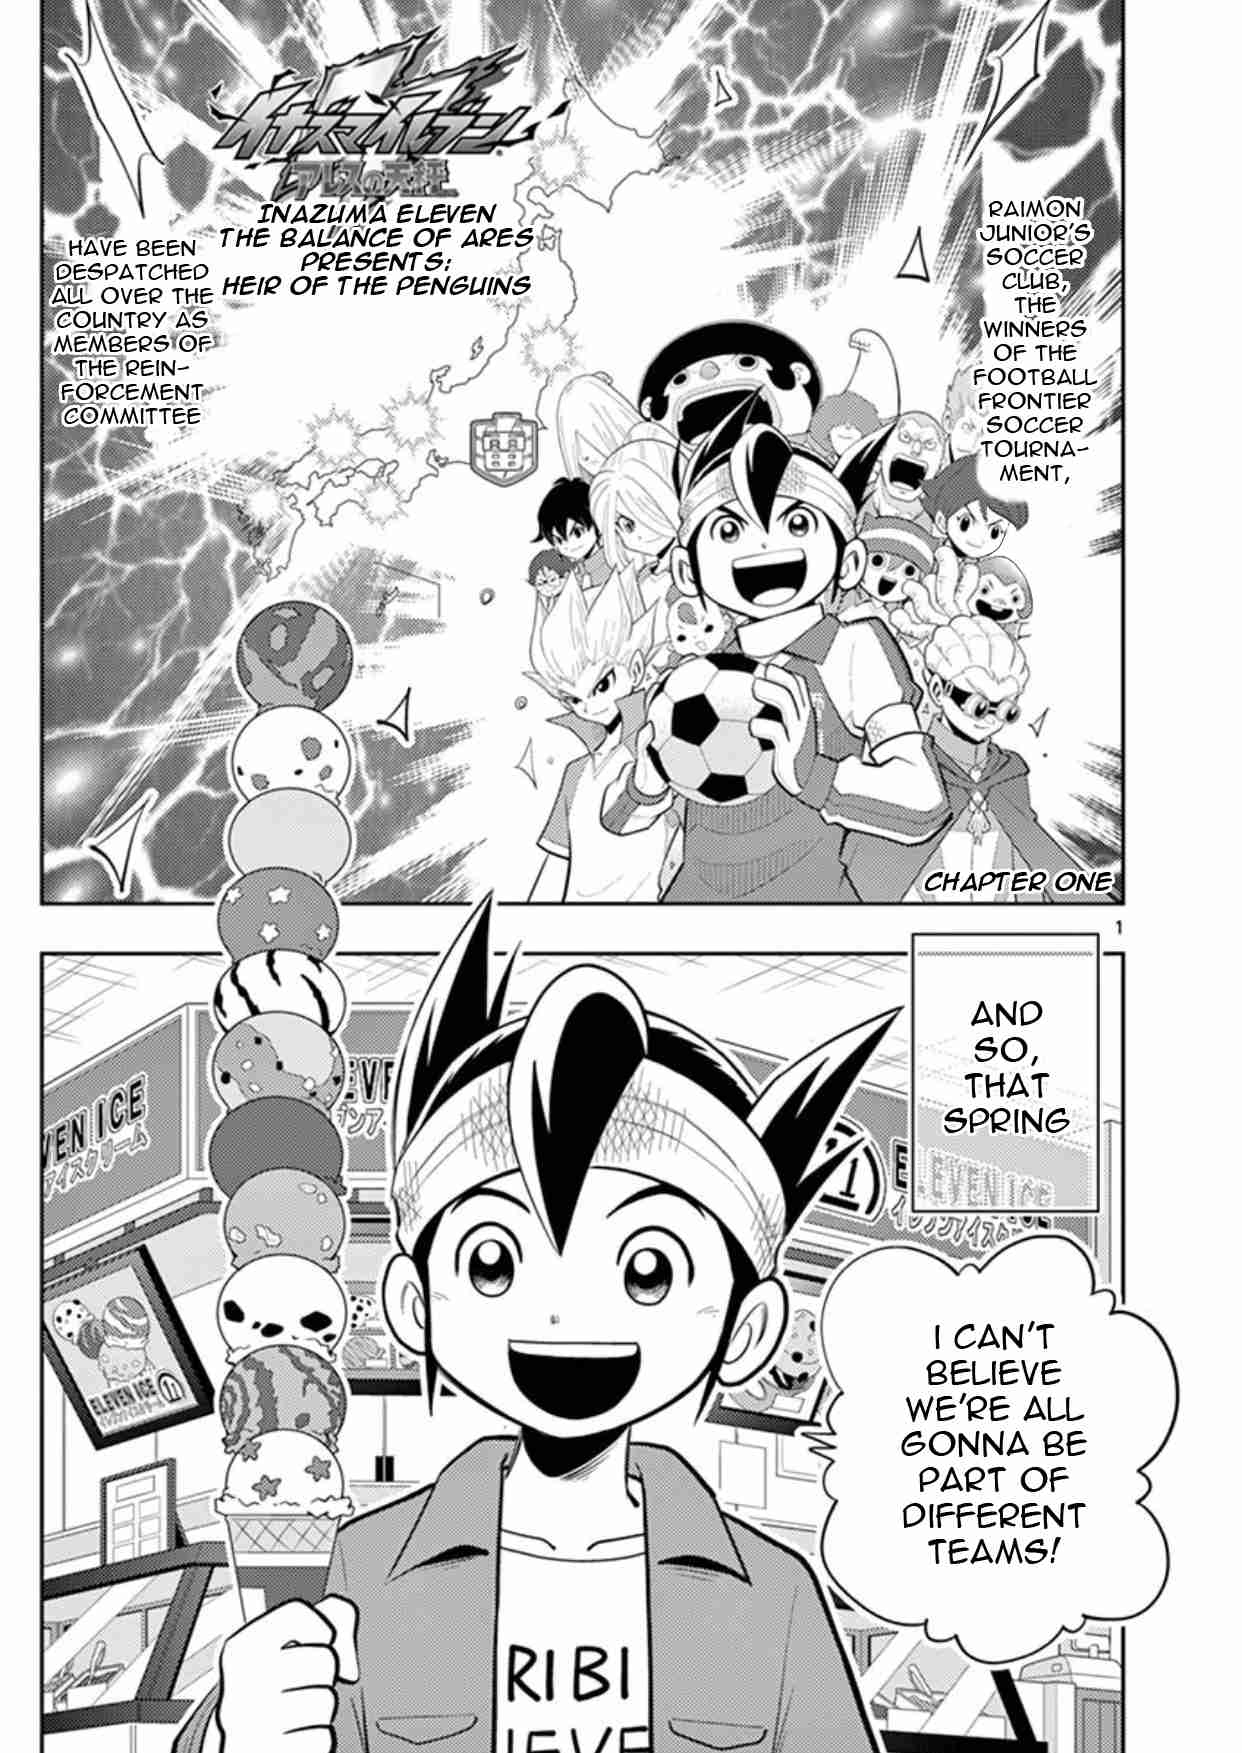 Inazuma Eleven Heir of the Penguins Vol. 1 Ch. 1 Chapter 1